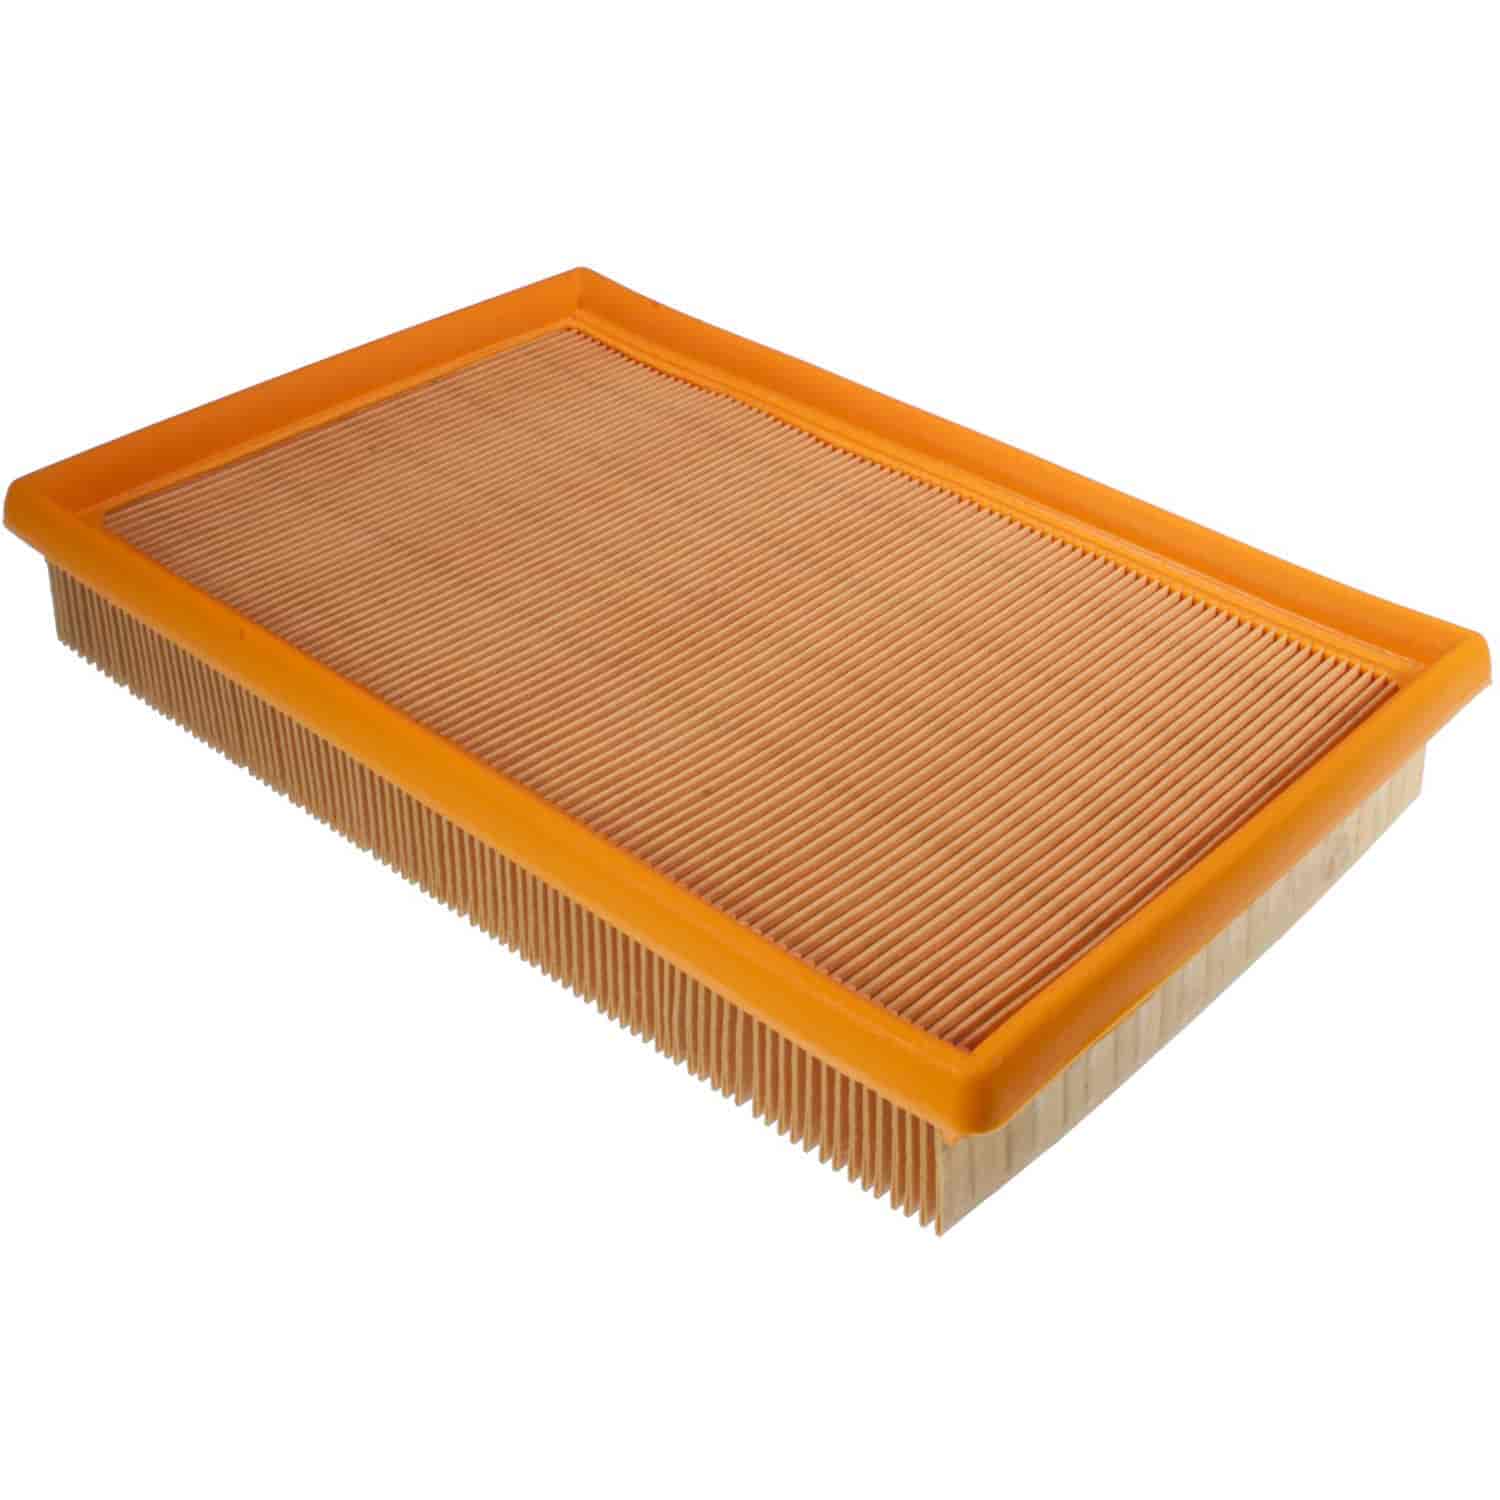 Mahle Air Filter Mercury Villager 93-01 for Nissan Quest 93-01